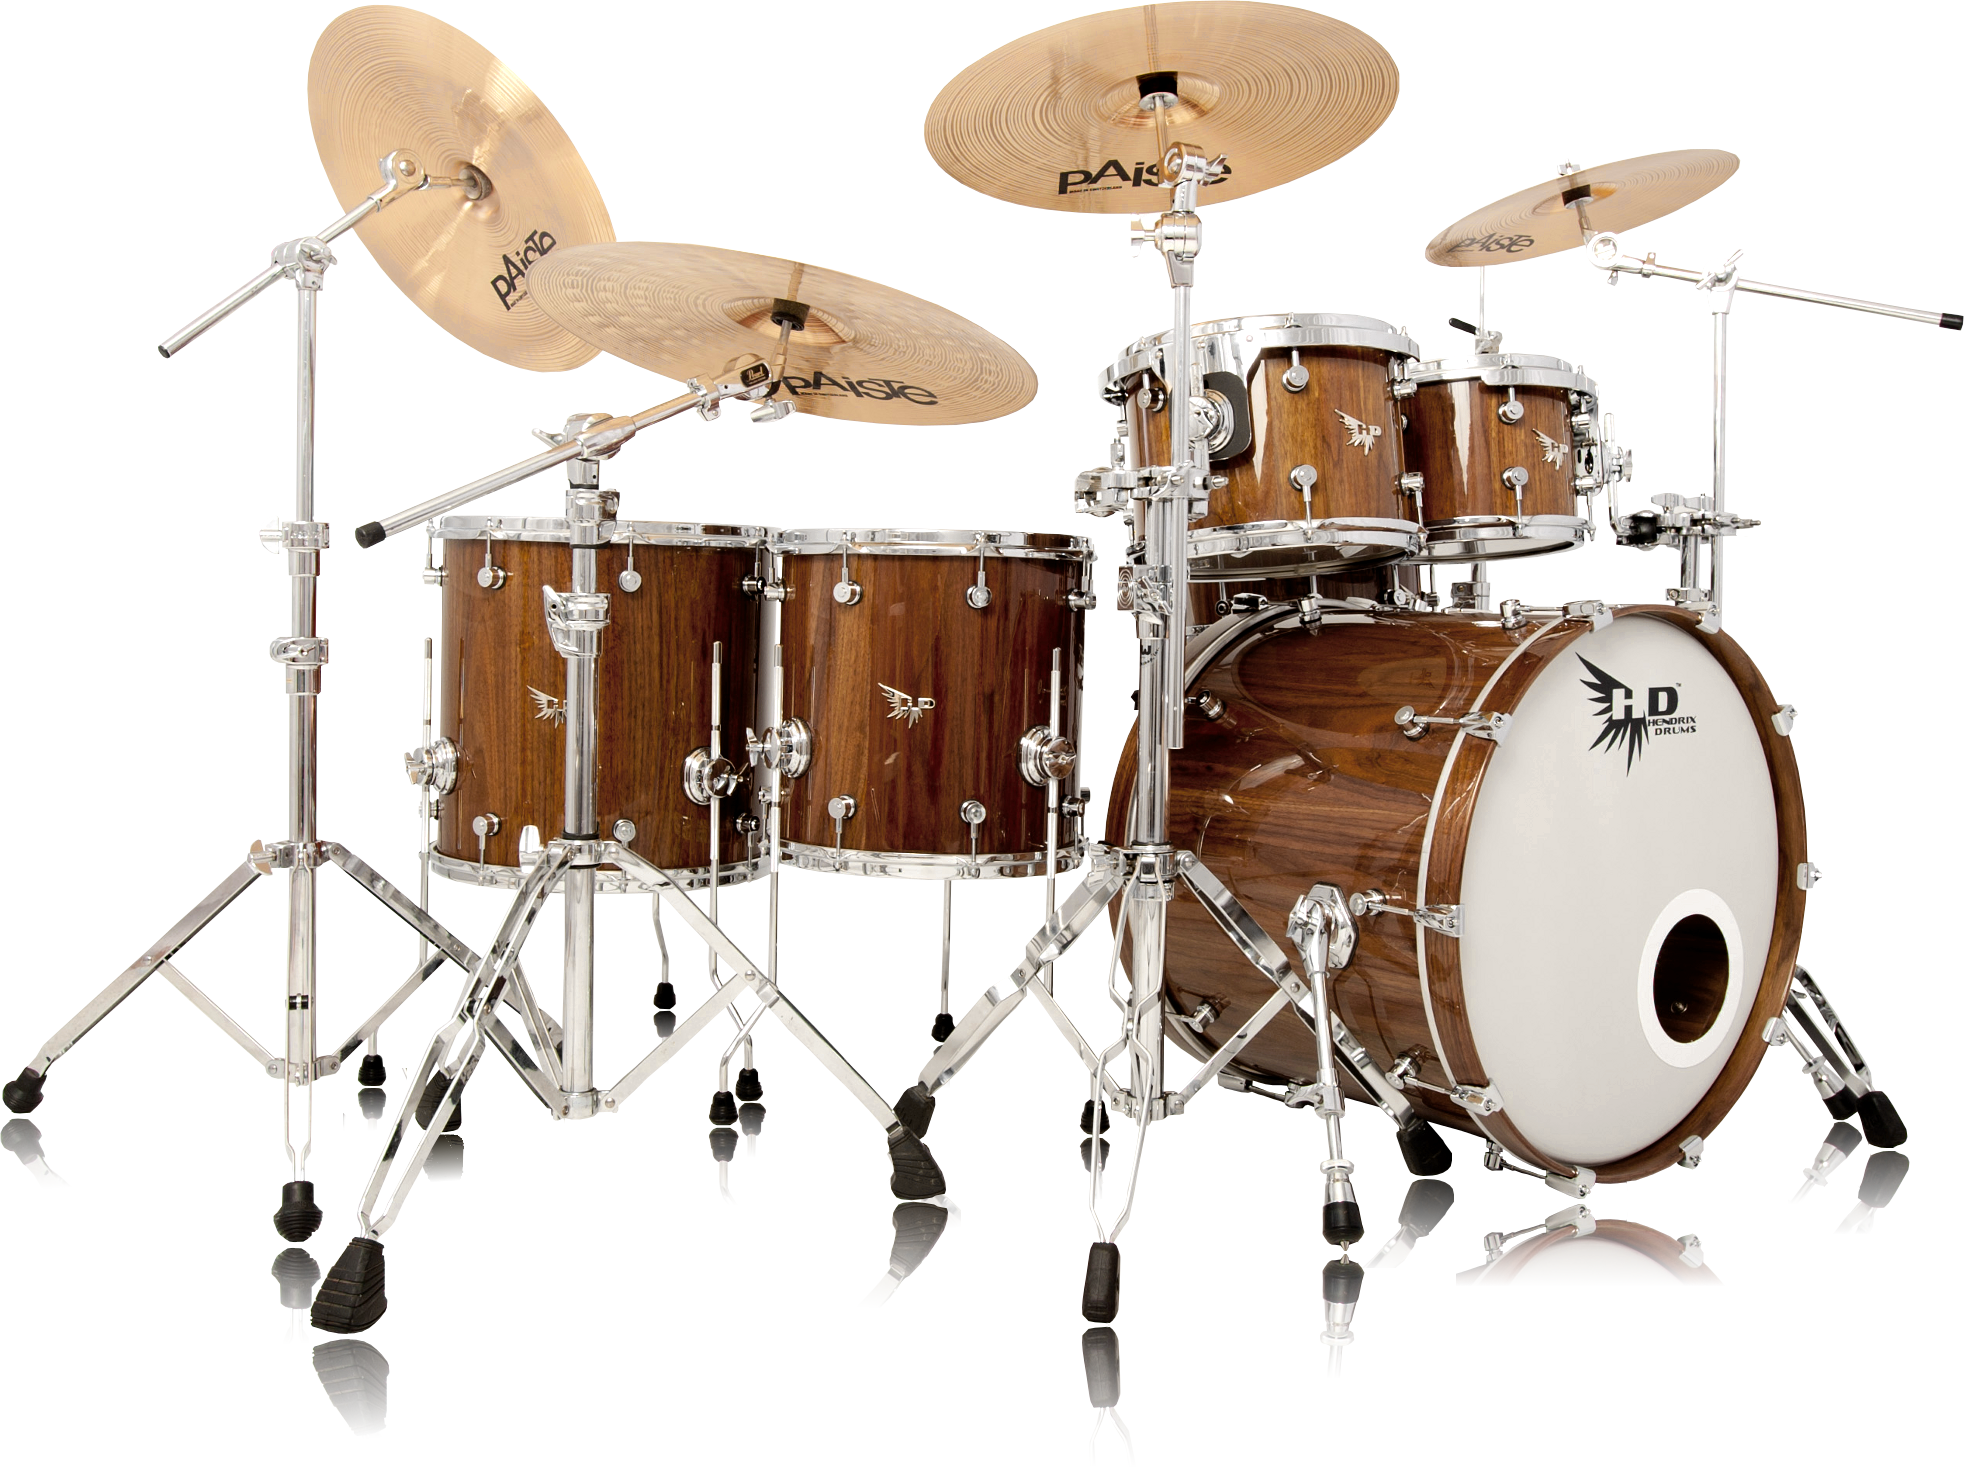 Drums Format: PNG Resolution: